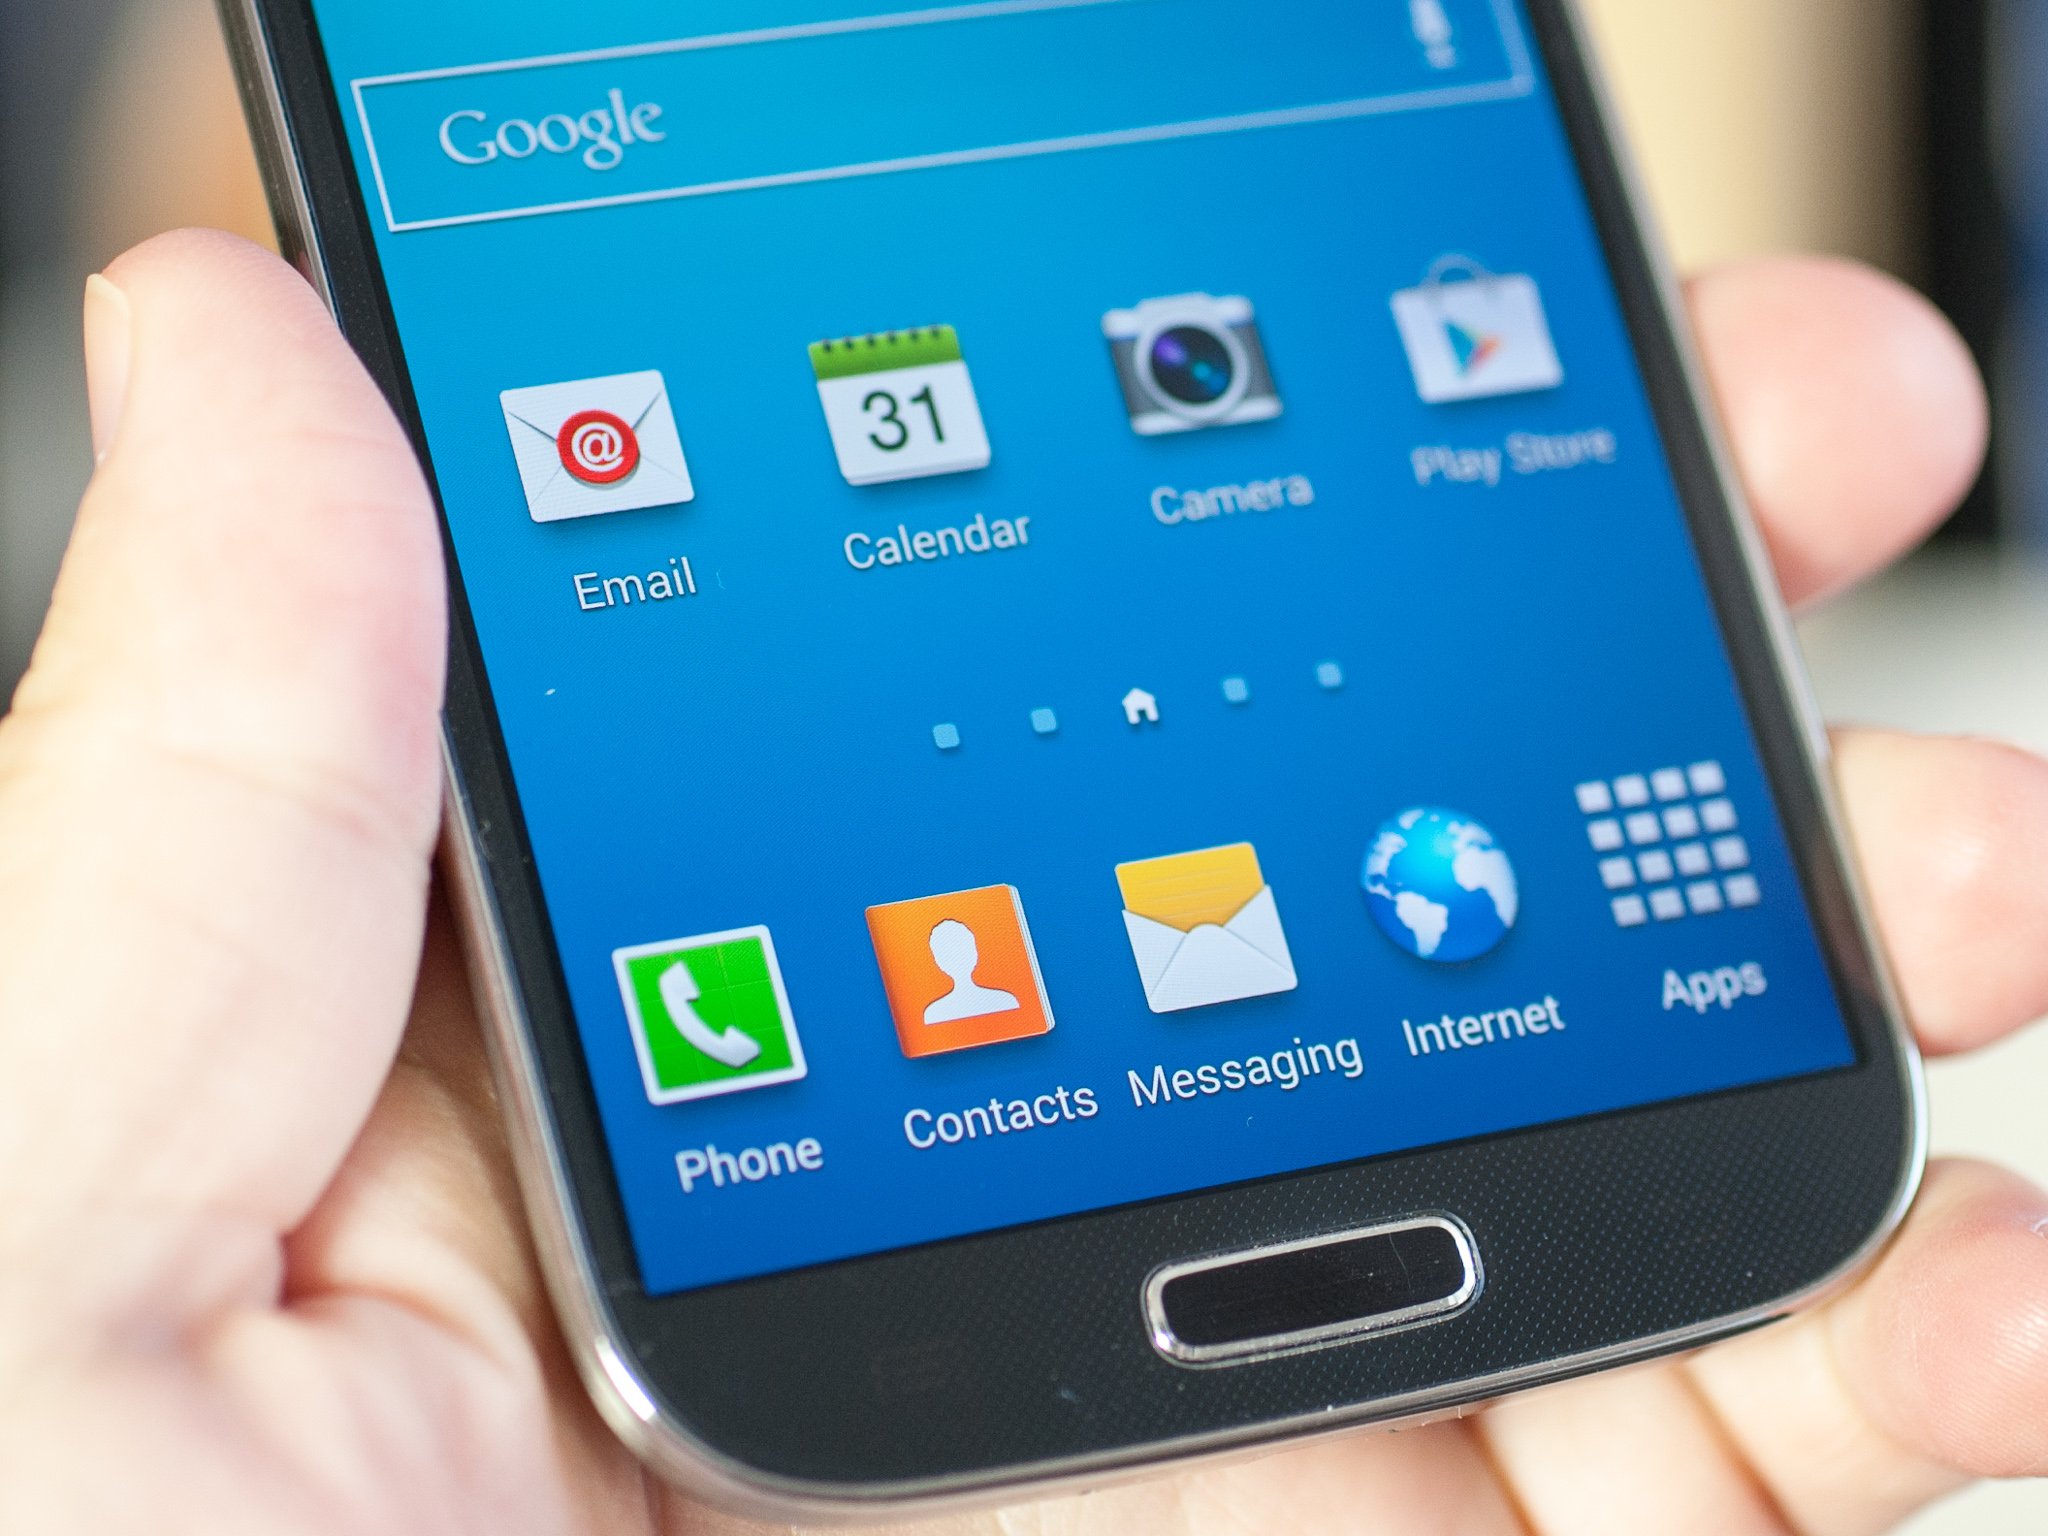 How to take a screenshot with the Samsung Galaxy S4 | Android Central